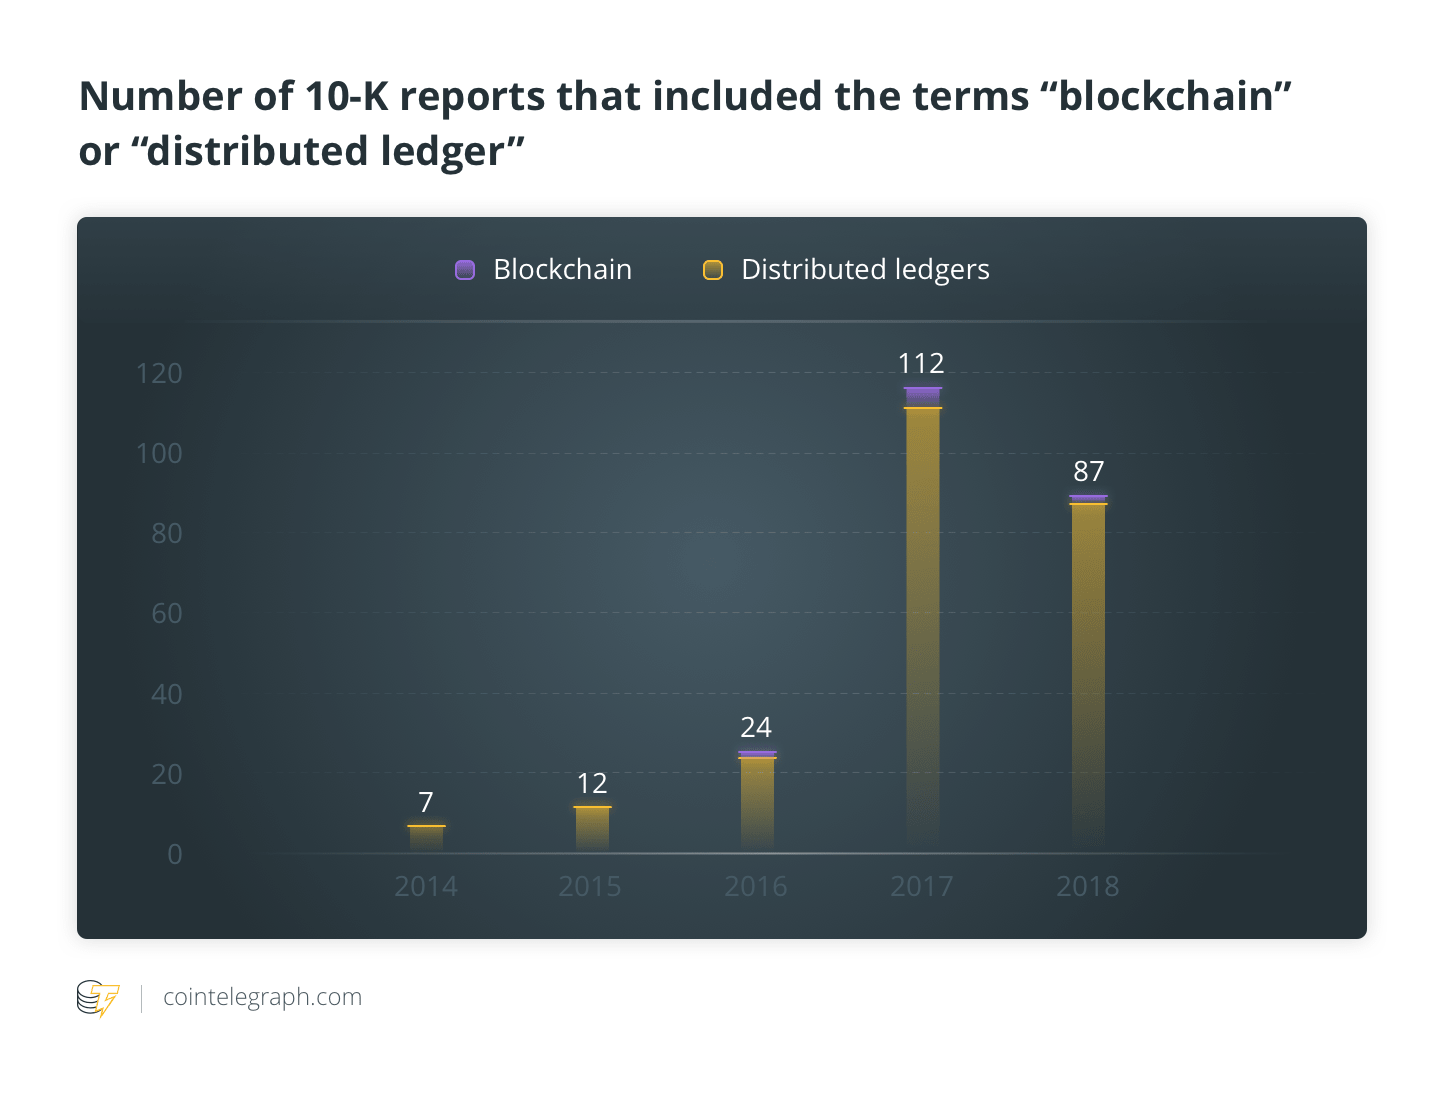 Number of 10-K reports that included the terms "blockchain" or "distributed ledger"